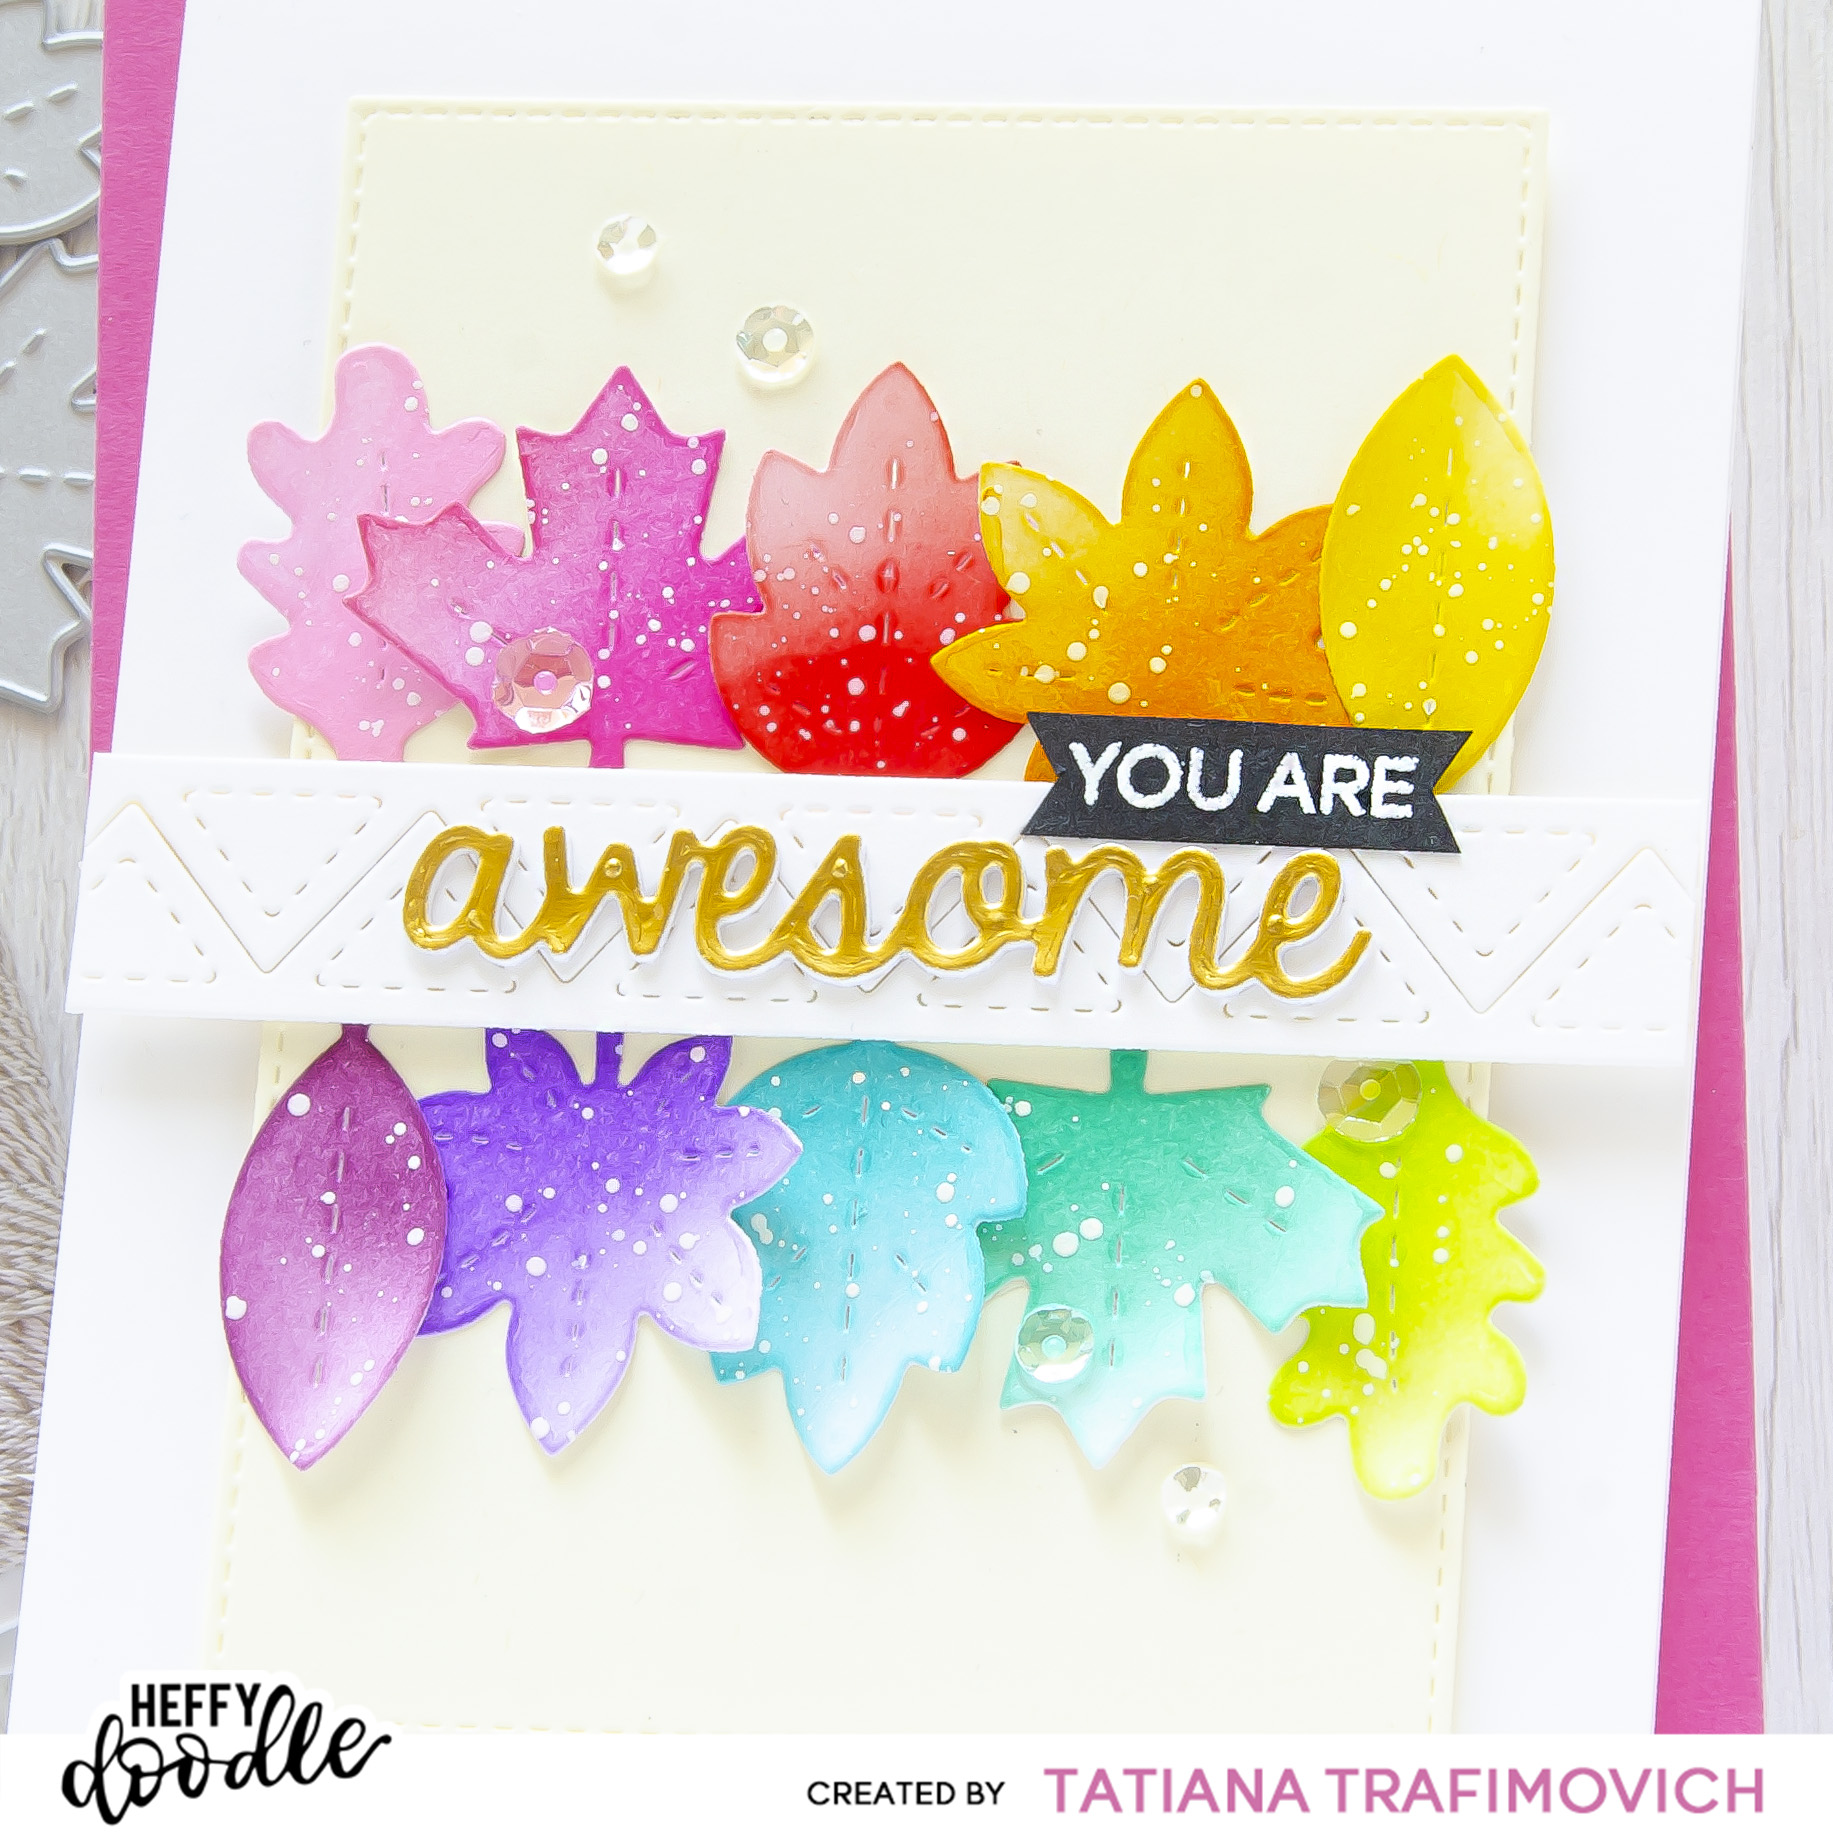 You Are Awesome #handmade card by Tatiana Trafimovich #tatianacraftandart - Forest Leaves Dies by Heffy Doodle #heffydoodle